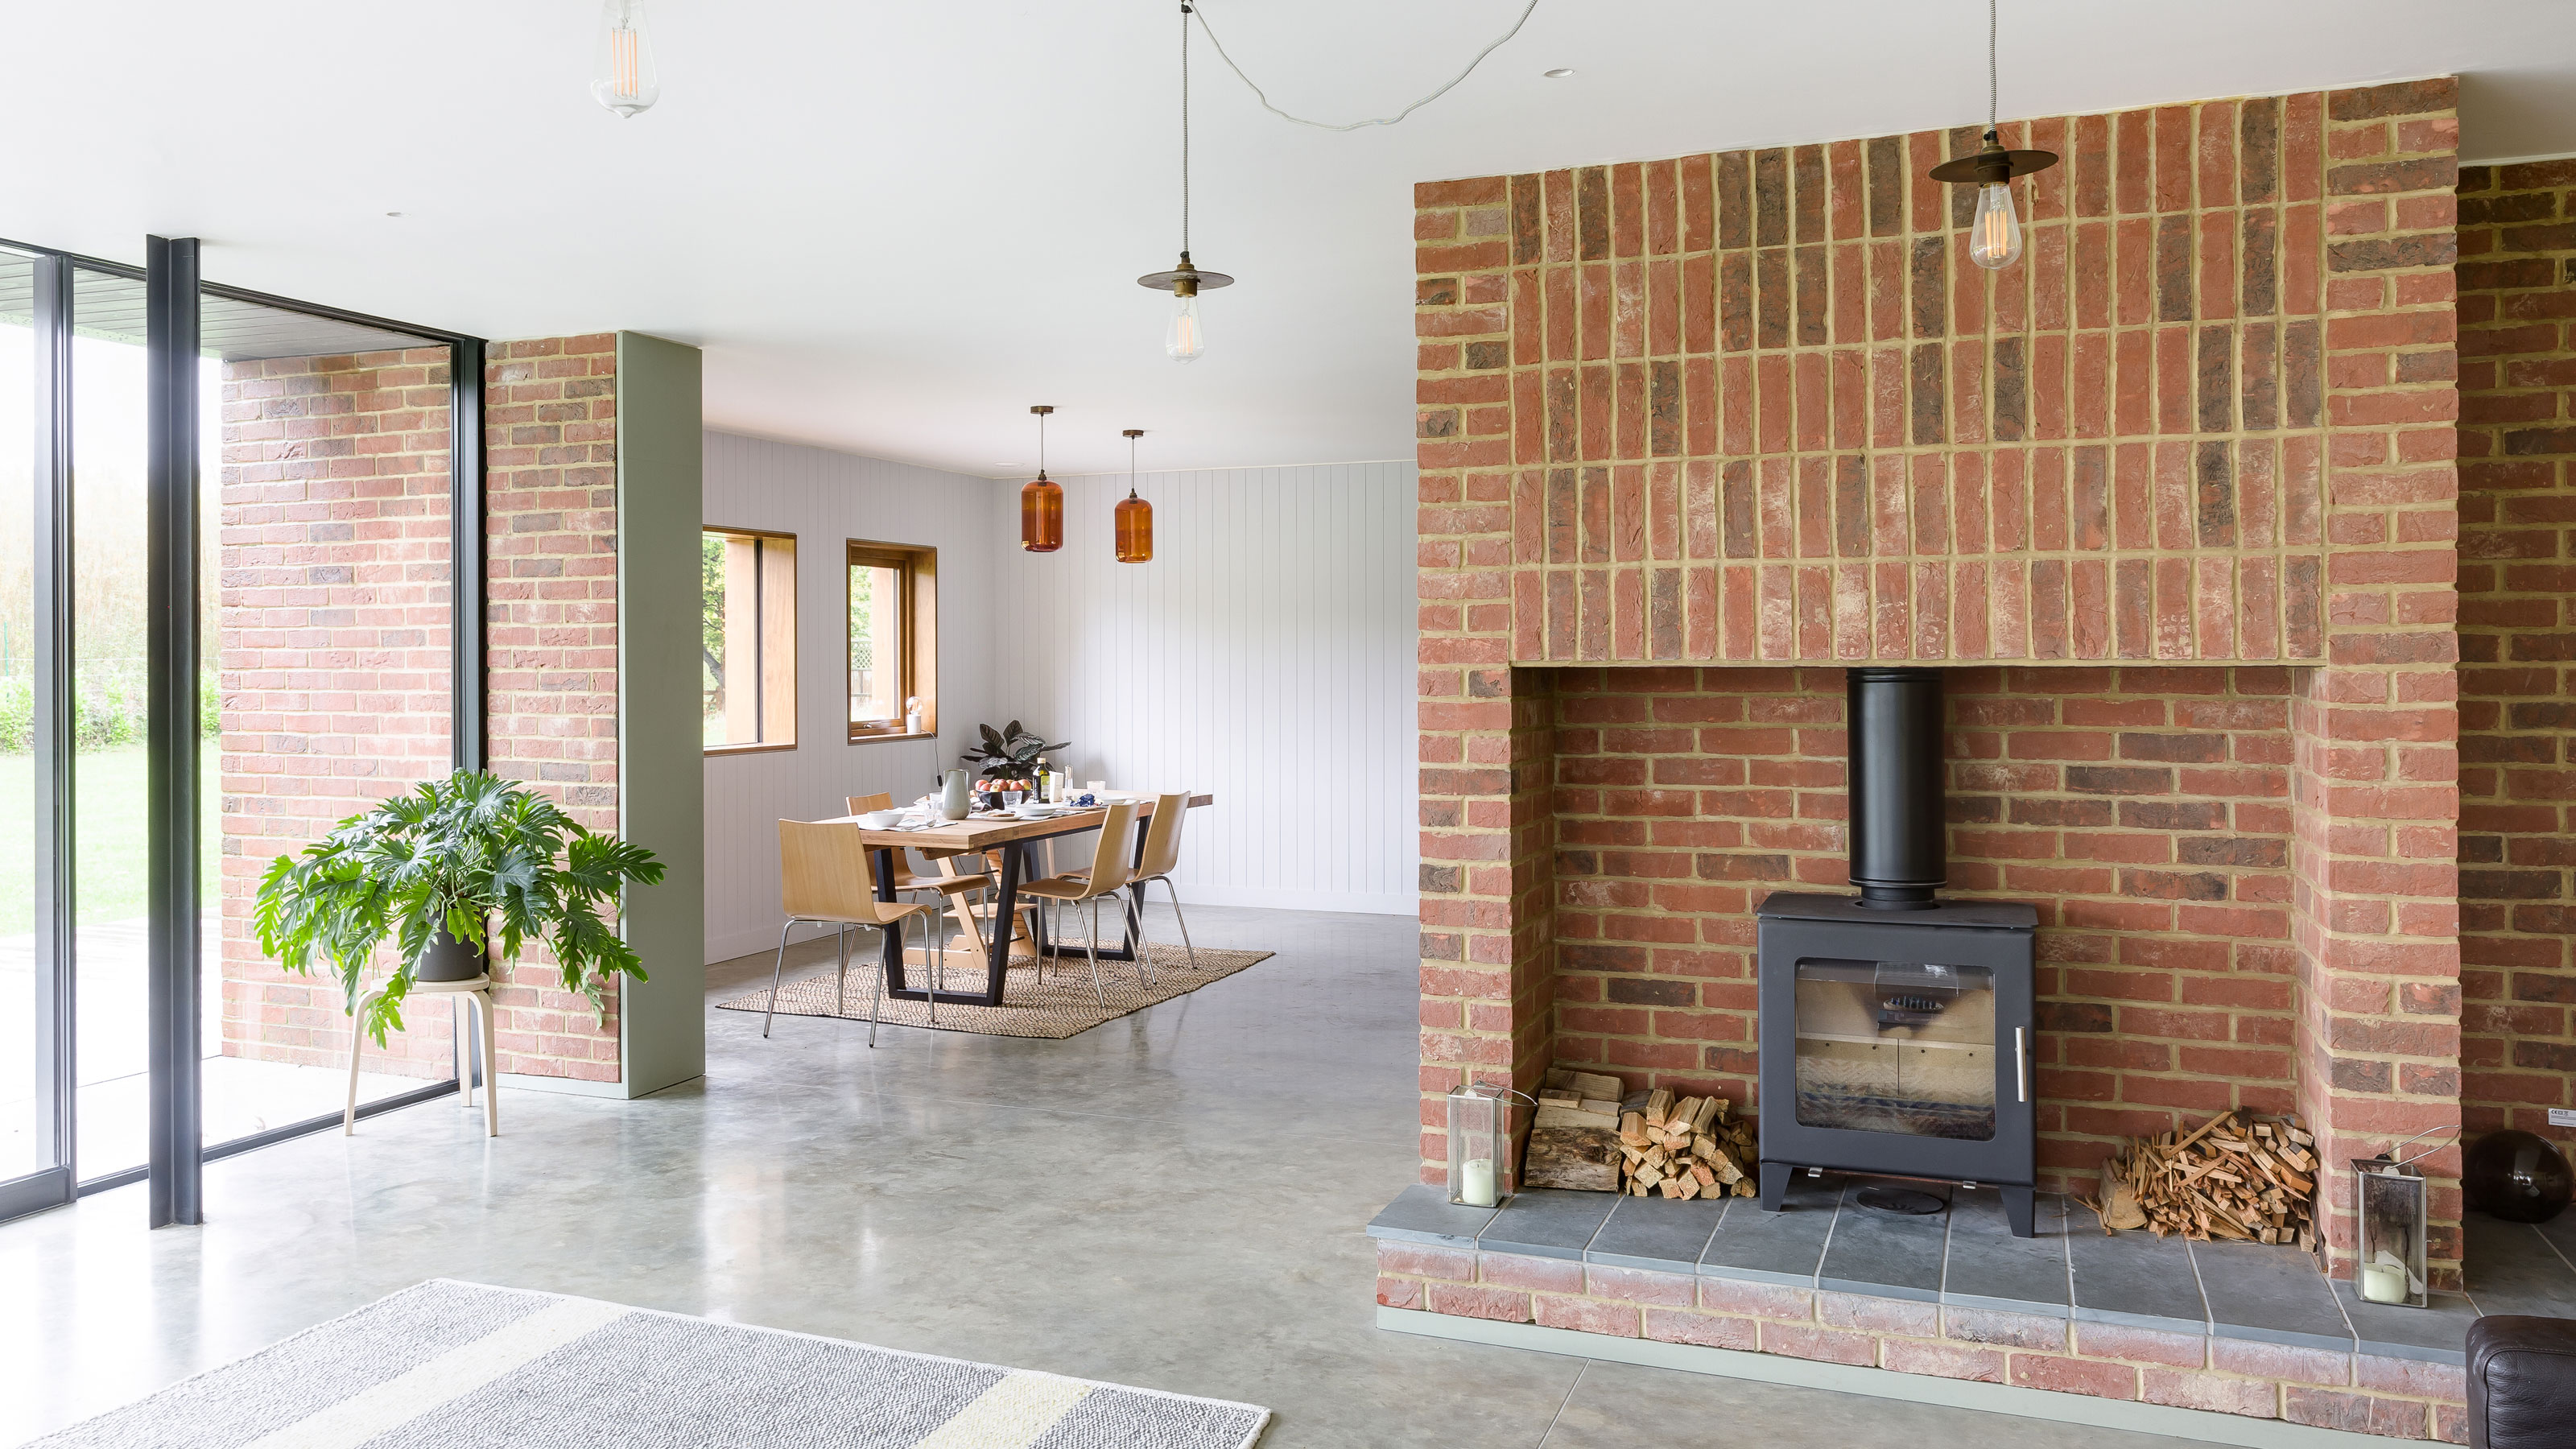 13 Brick Fireplace Ideas For A Rustic